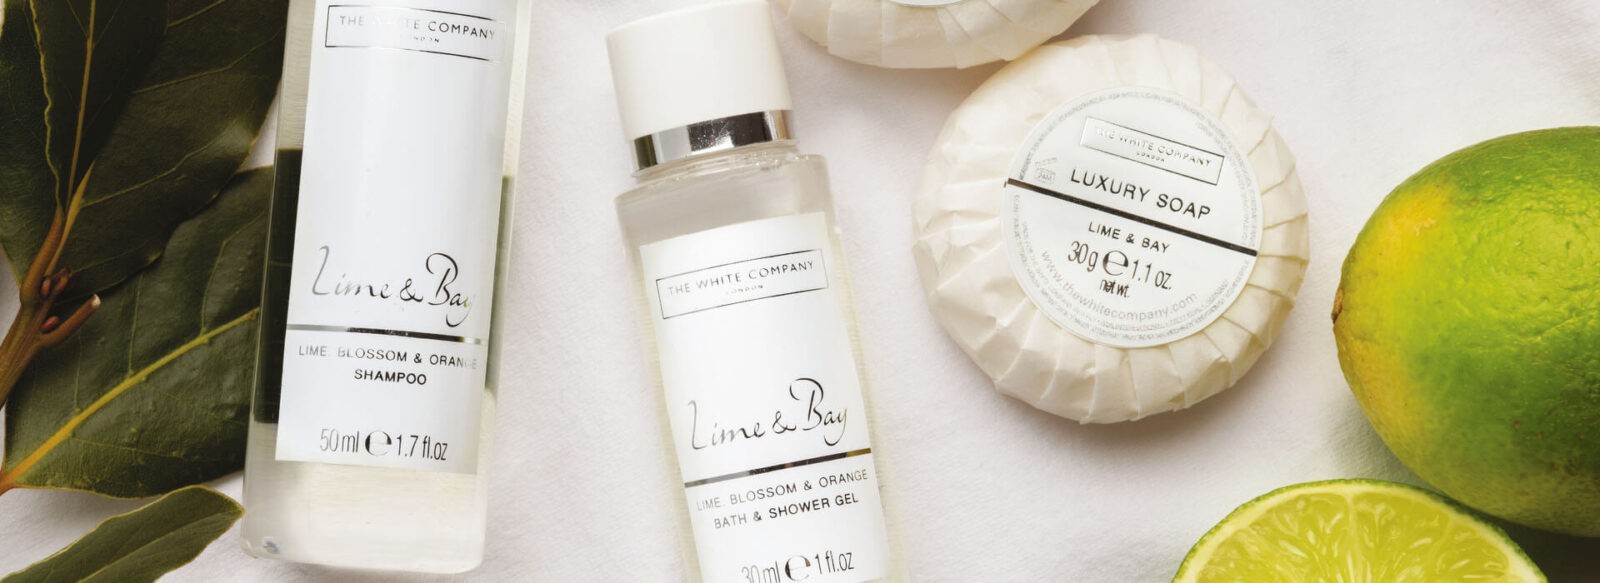 The White Company Lime and bay